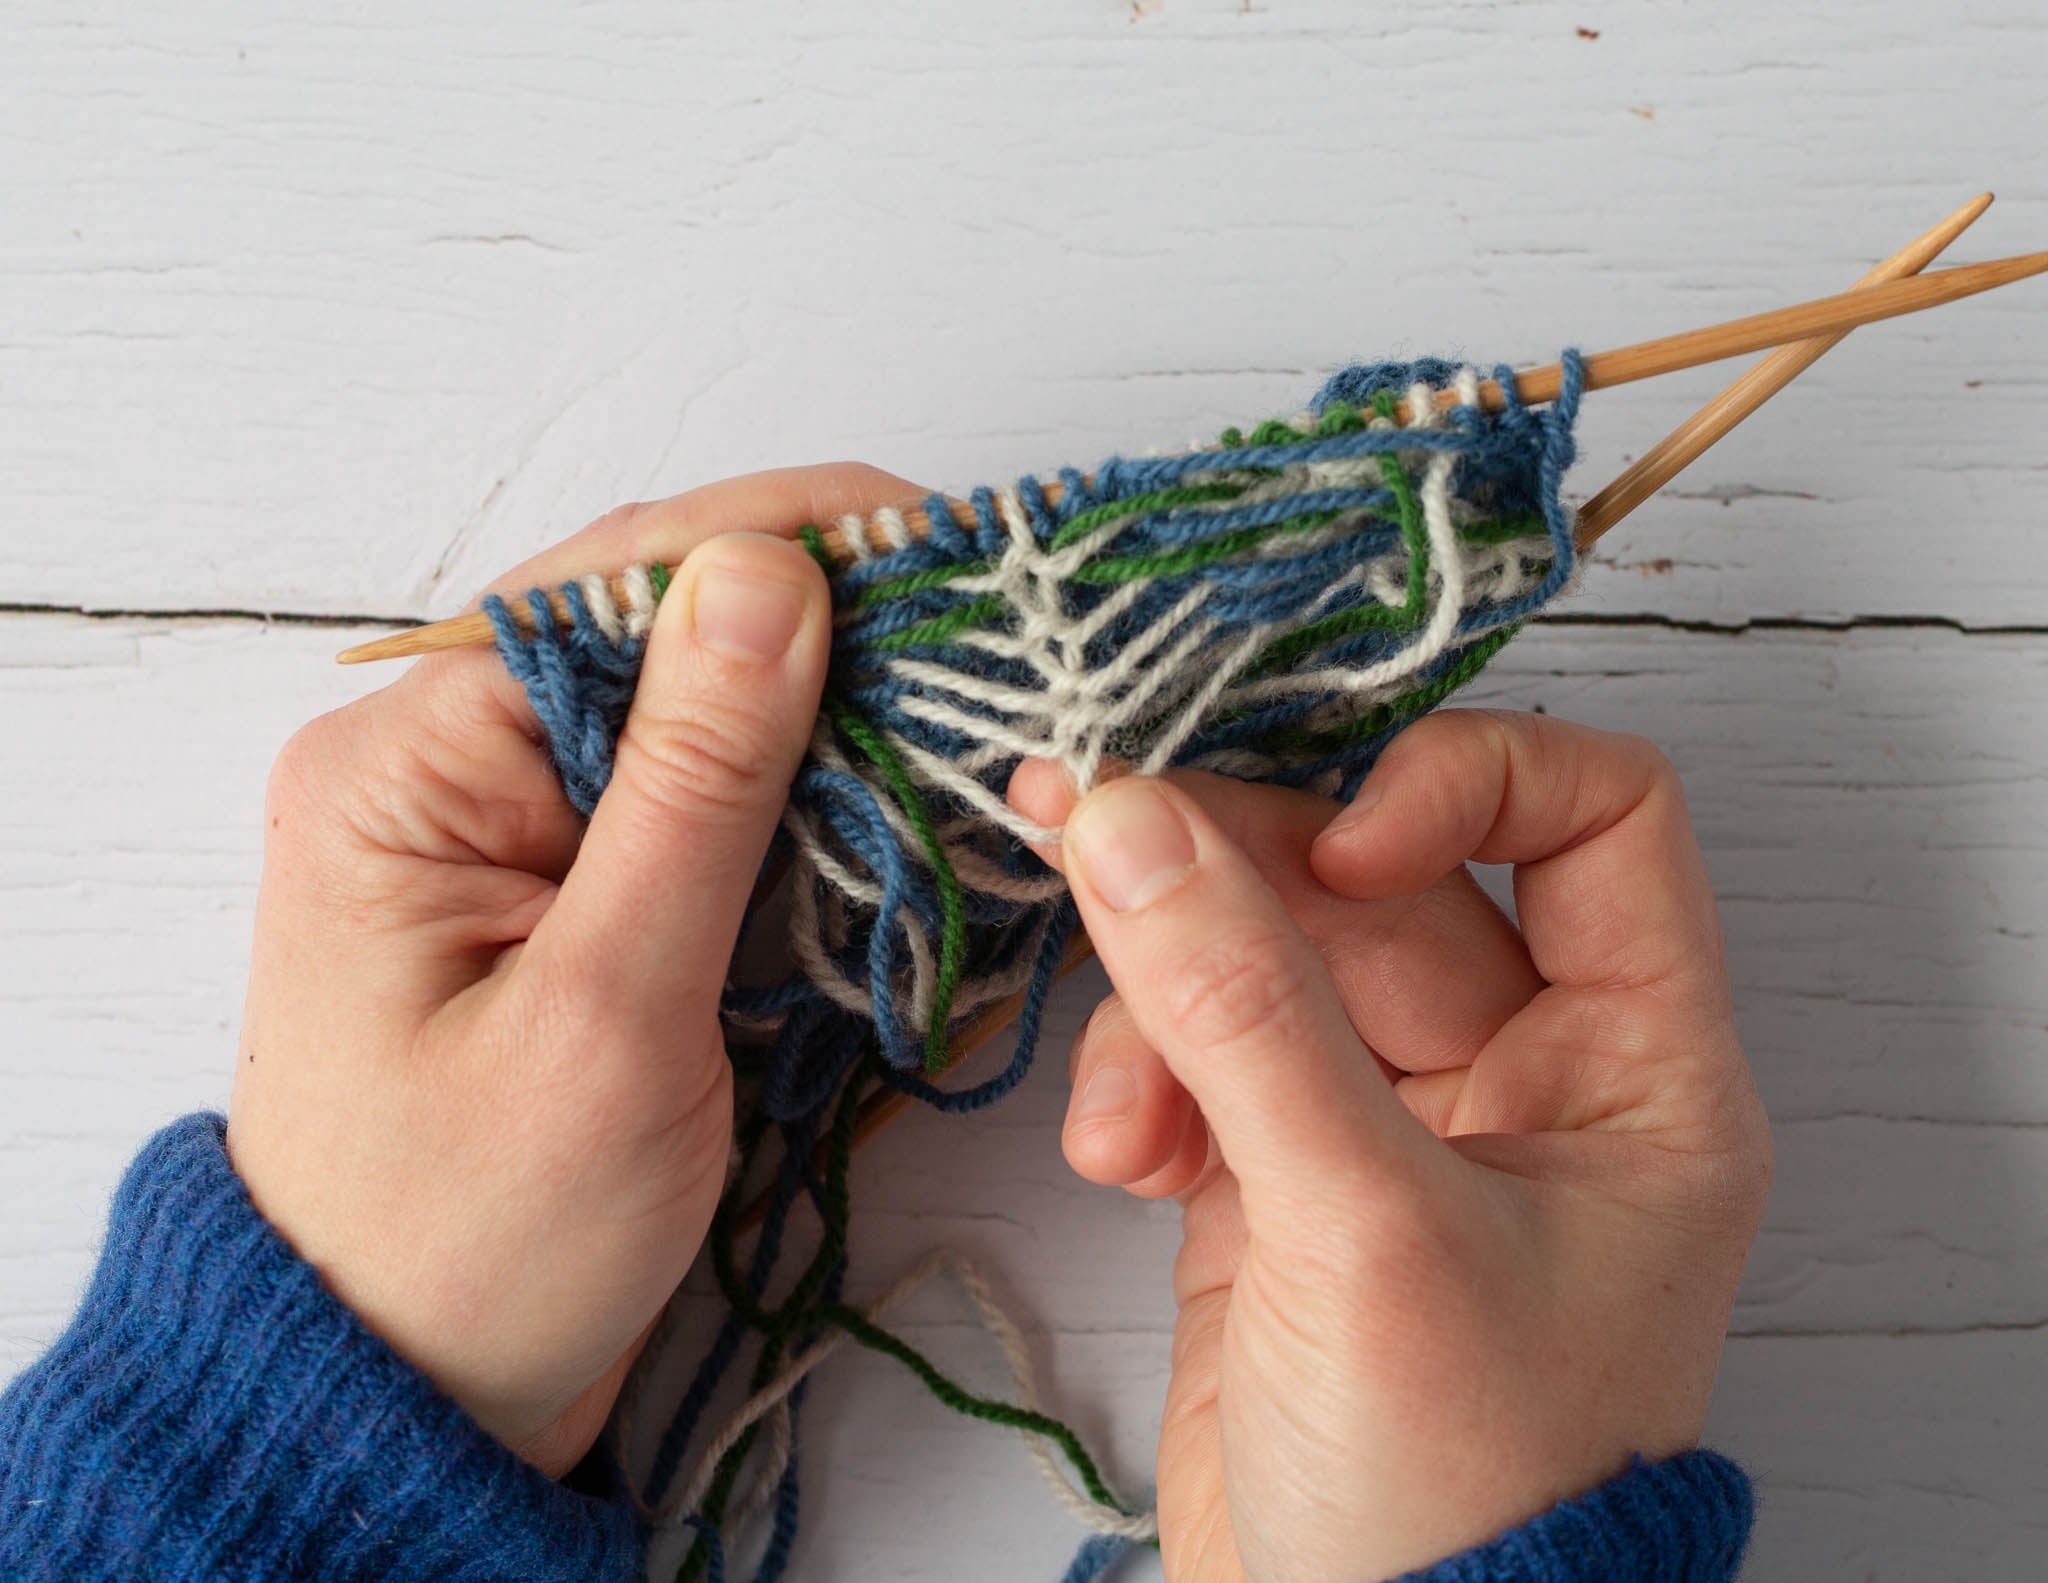 Two white hands hold a piece of blue and white knitting over a pale flat surface. The left hand grips the knitting near the knitting needles and the right hand pulls down on the fabric, showing the ladderback.